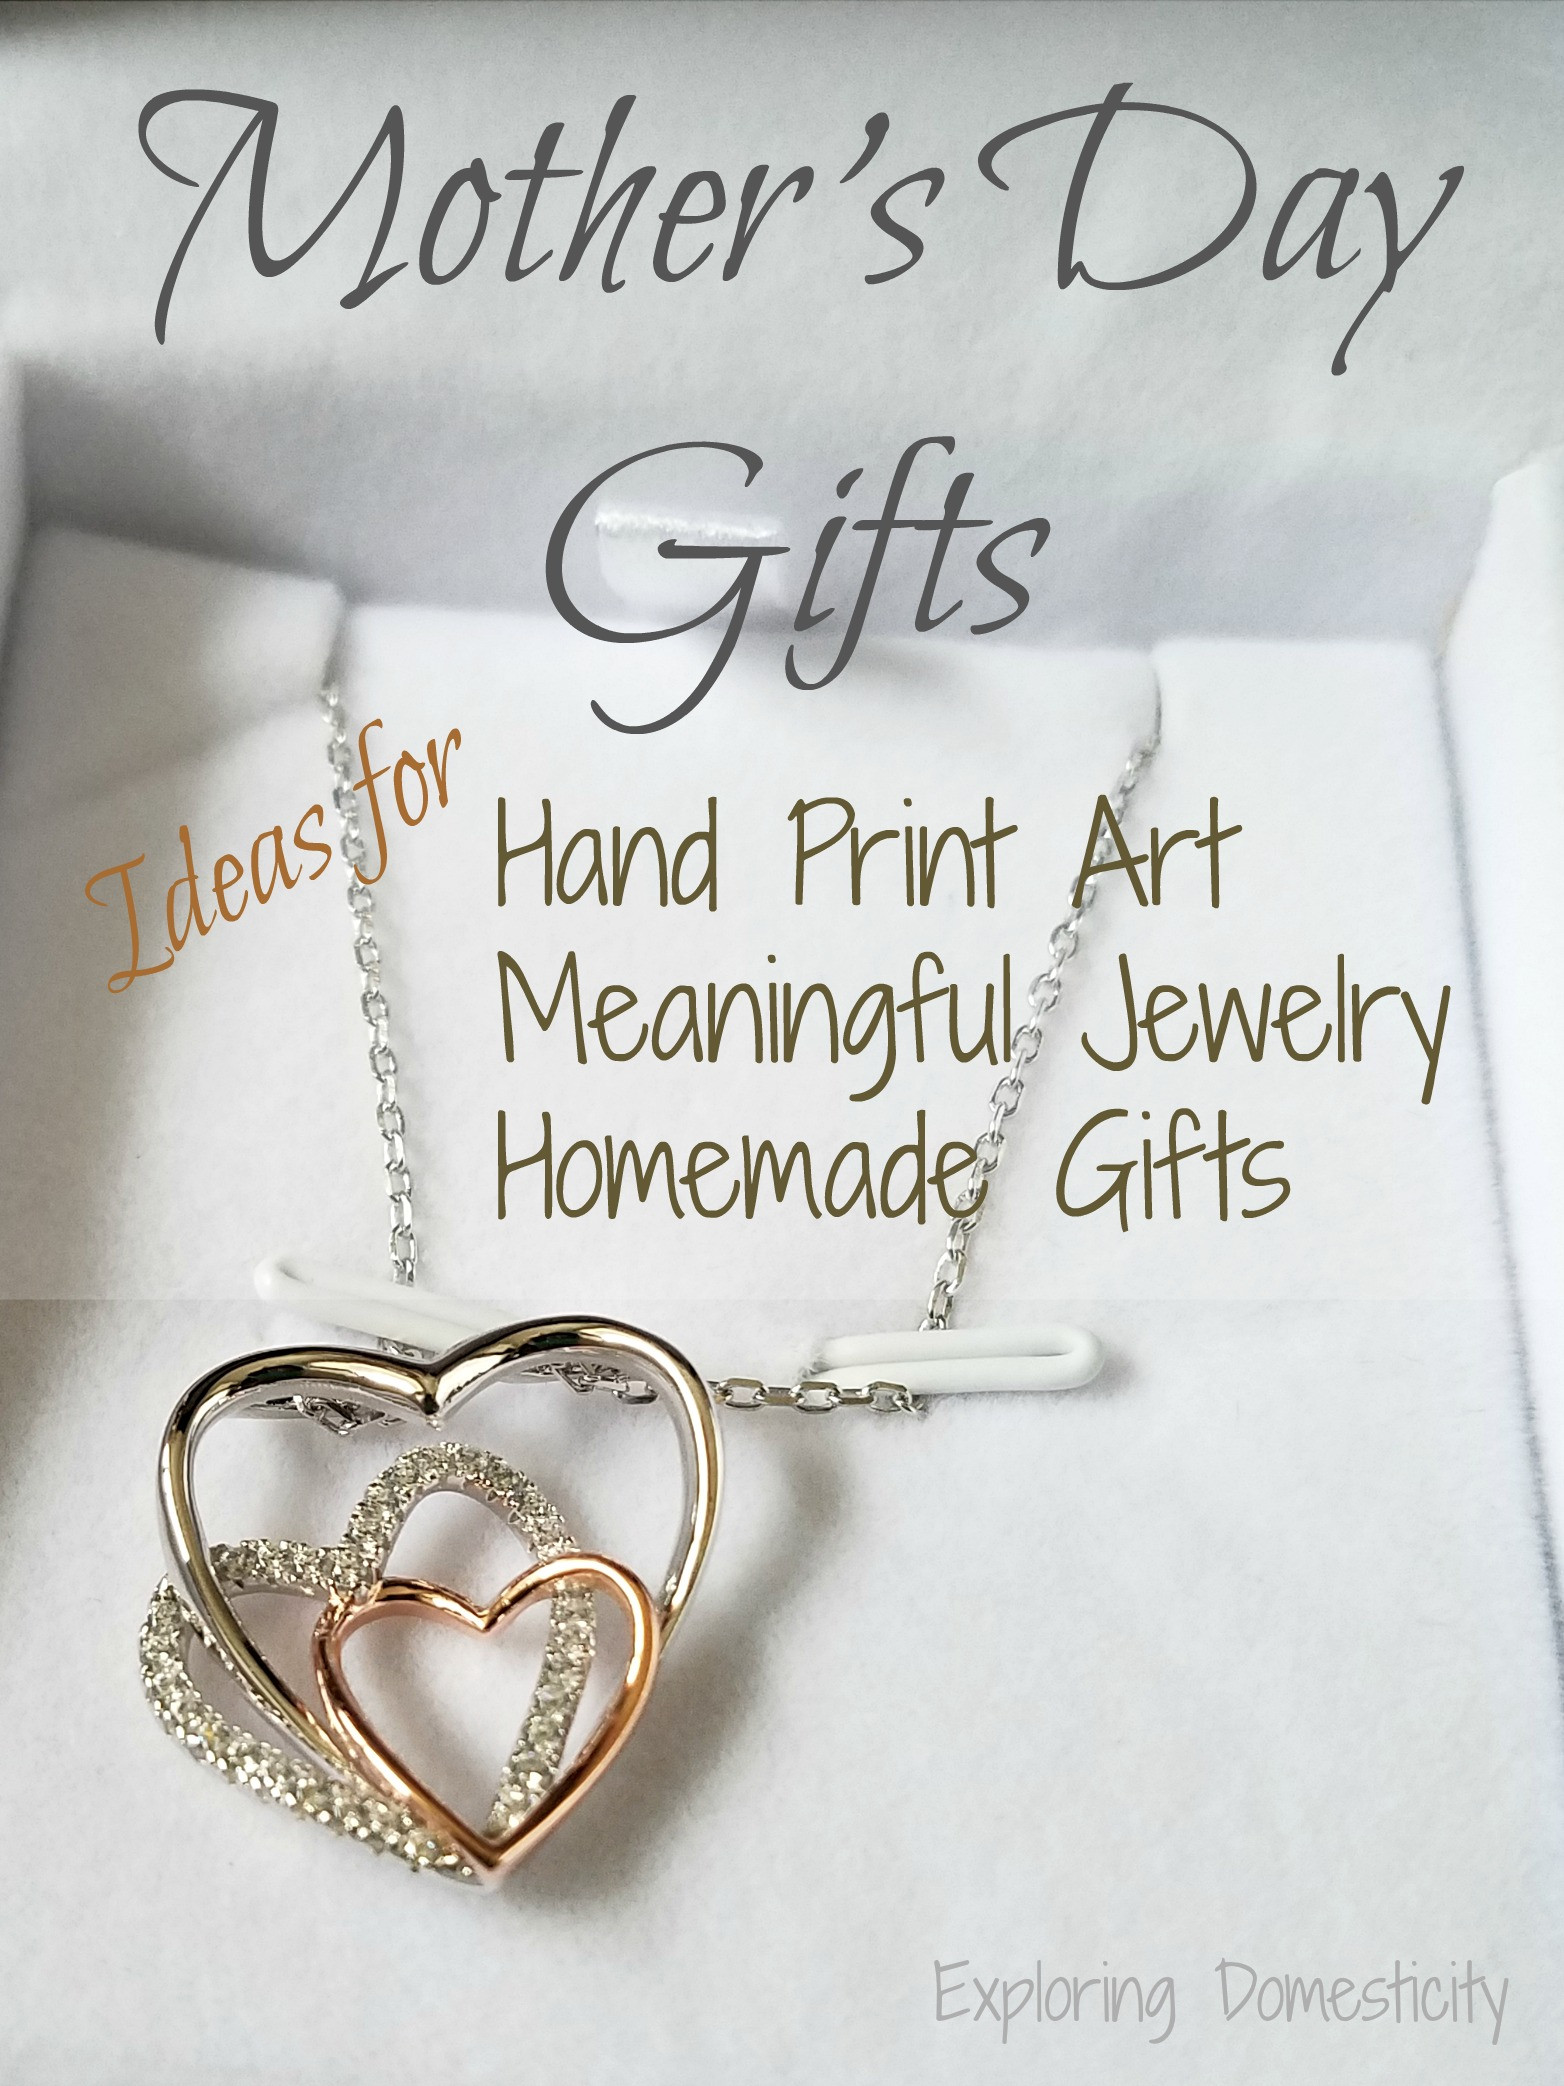 Mother'S Day Jewelry Gift Ideas
 Mother s Day Gifts Homemade Meaningful Jewelry and Hand